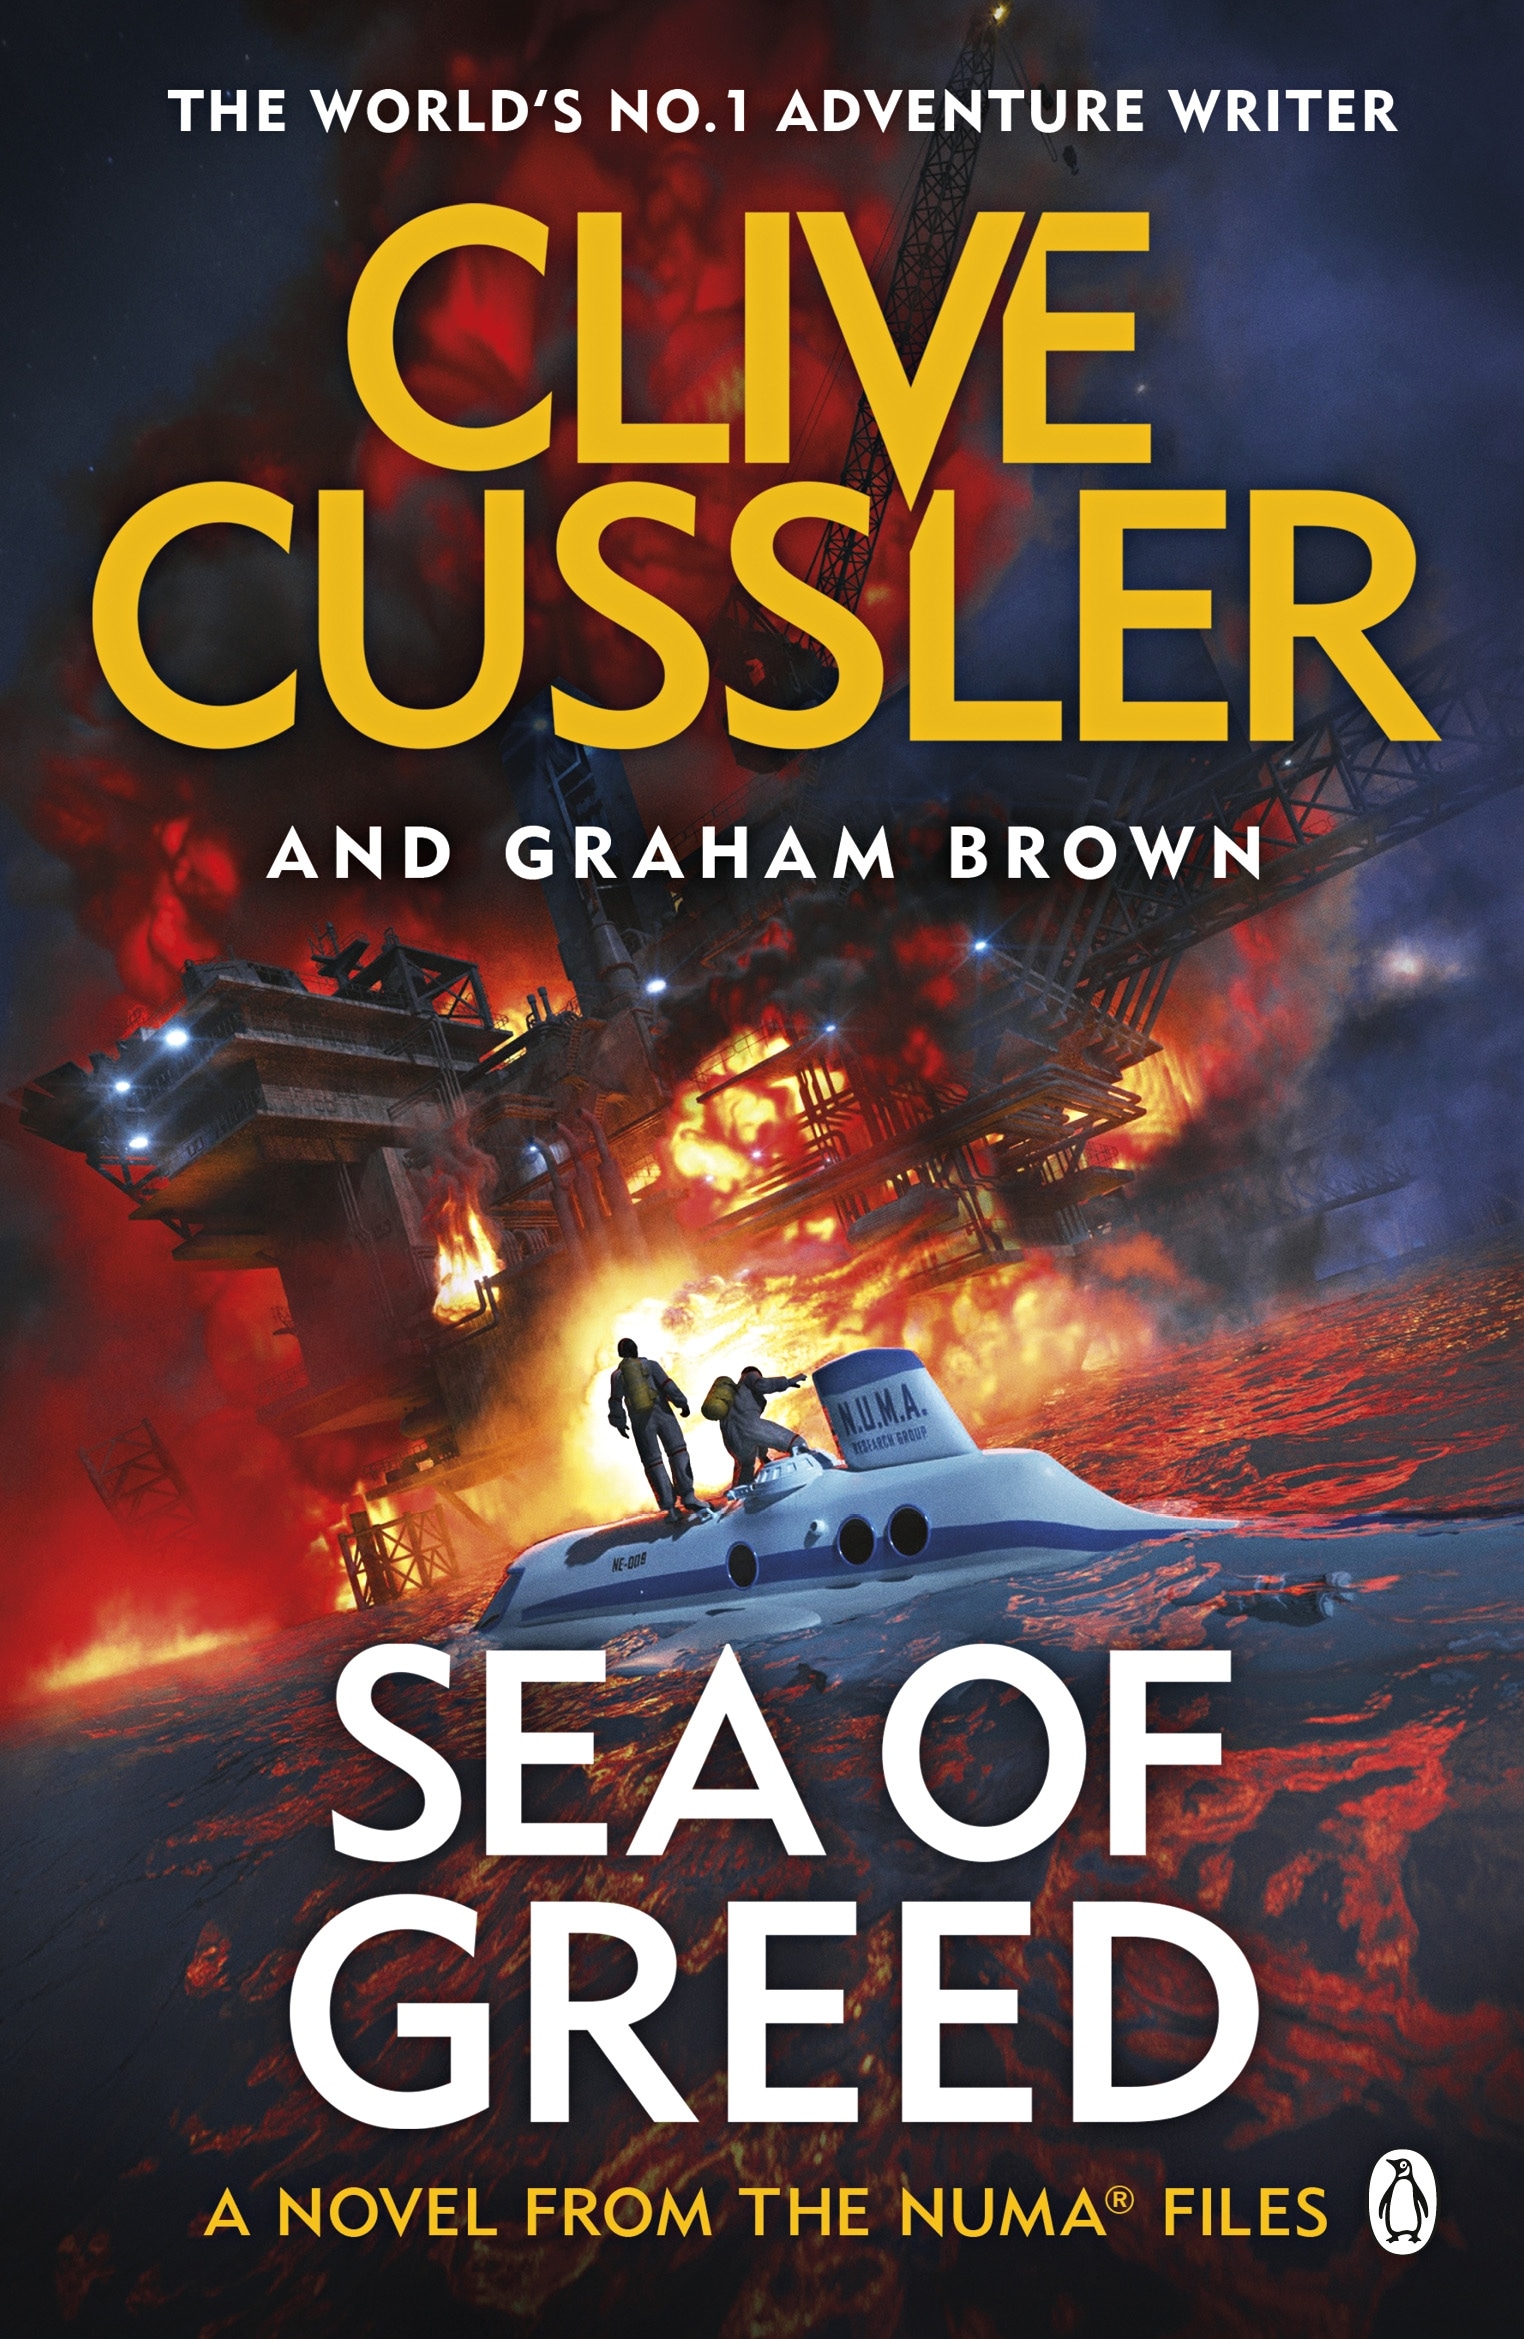 Book “Sea of Greed” by Clive Cussler, Graham Brown — October 3, 2019